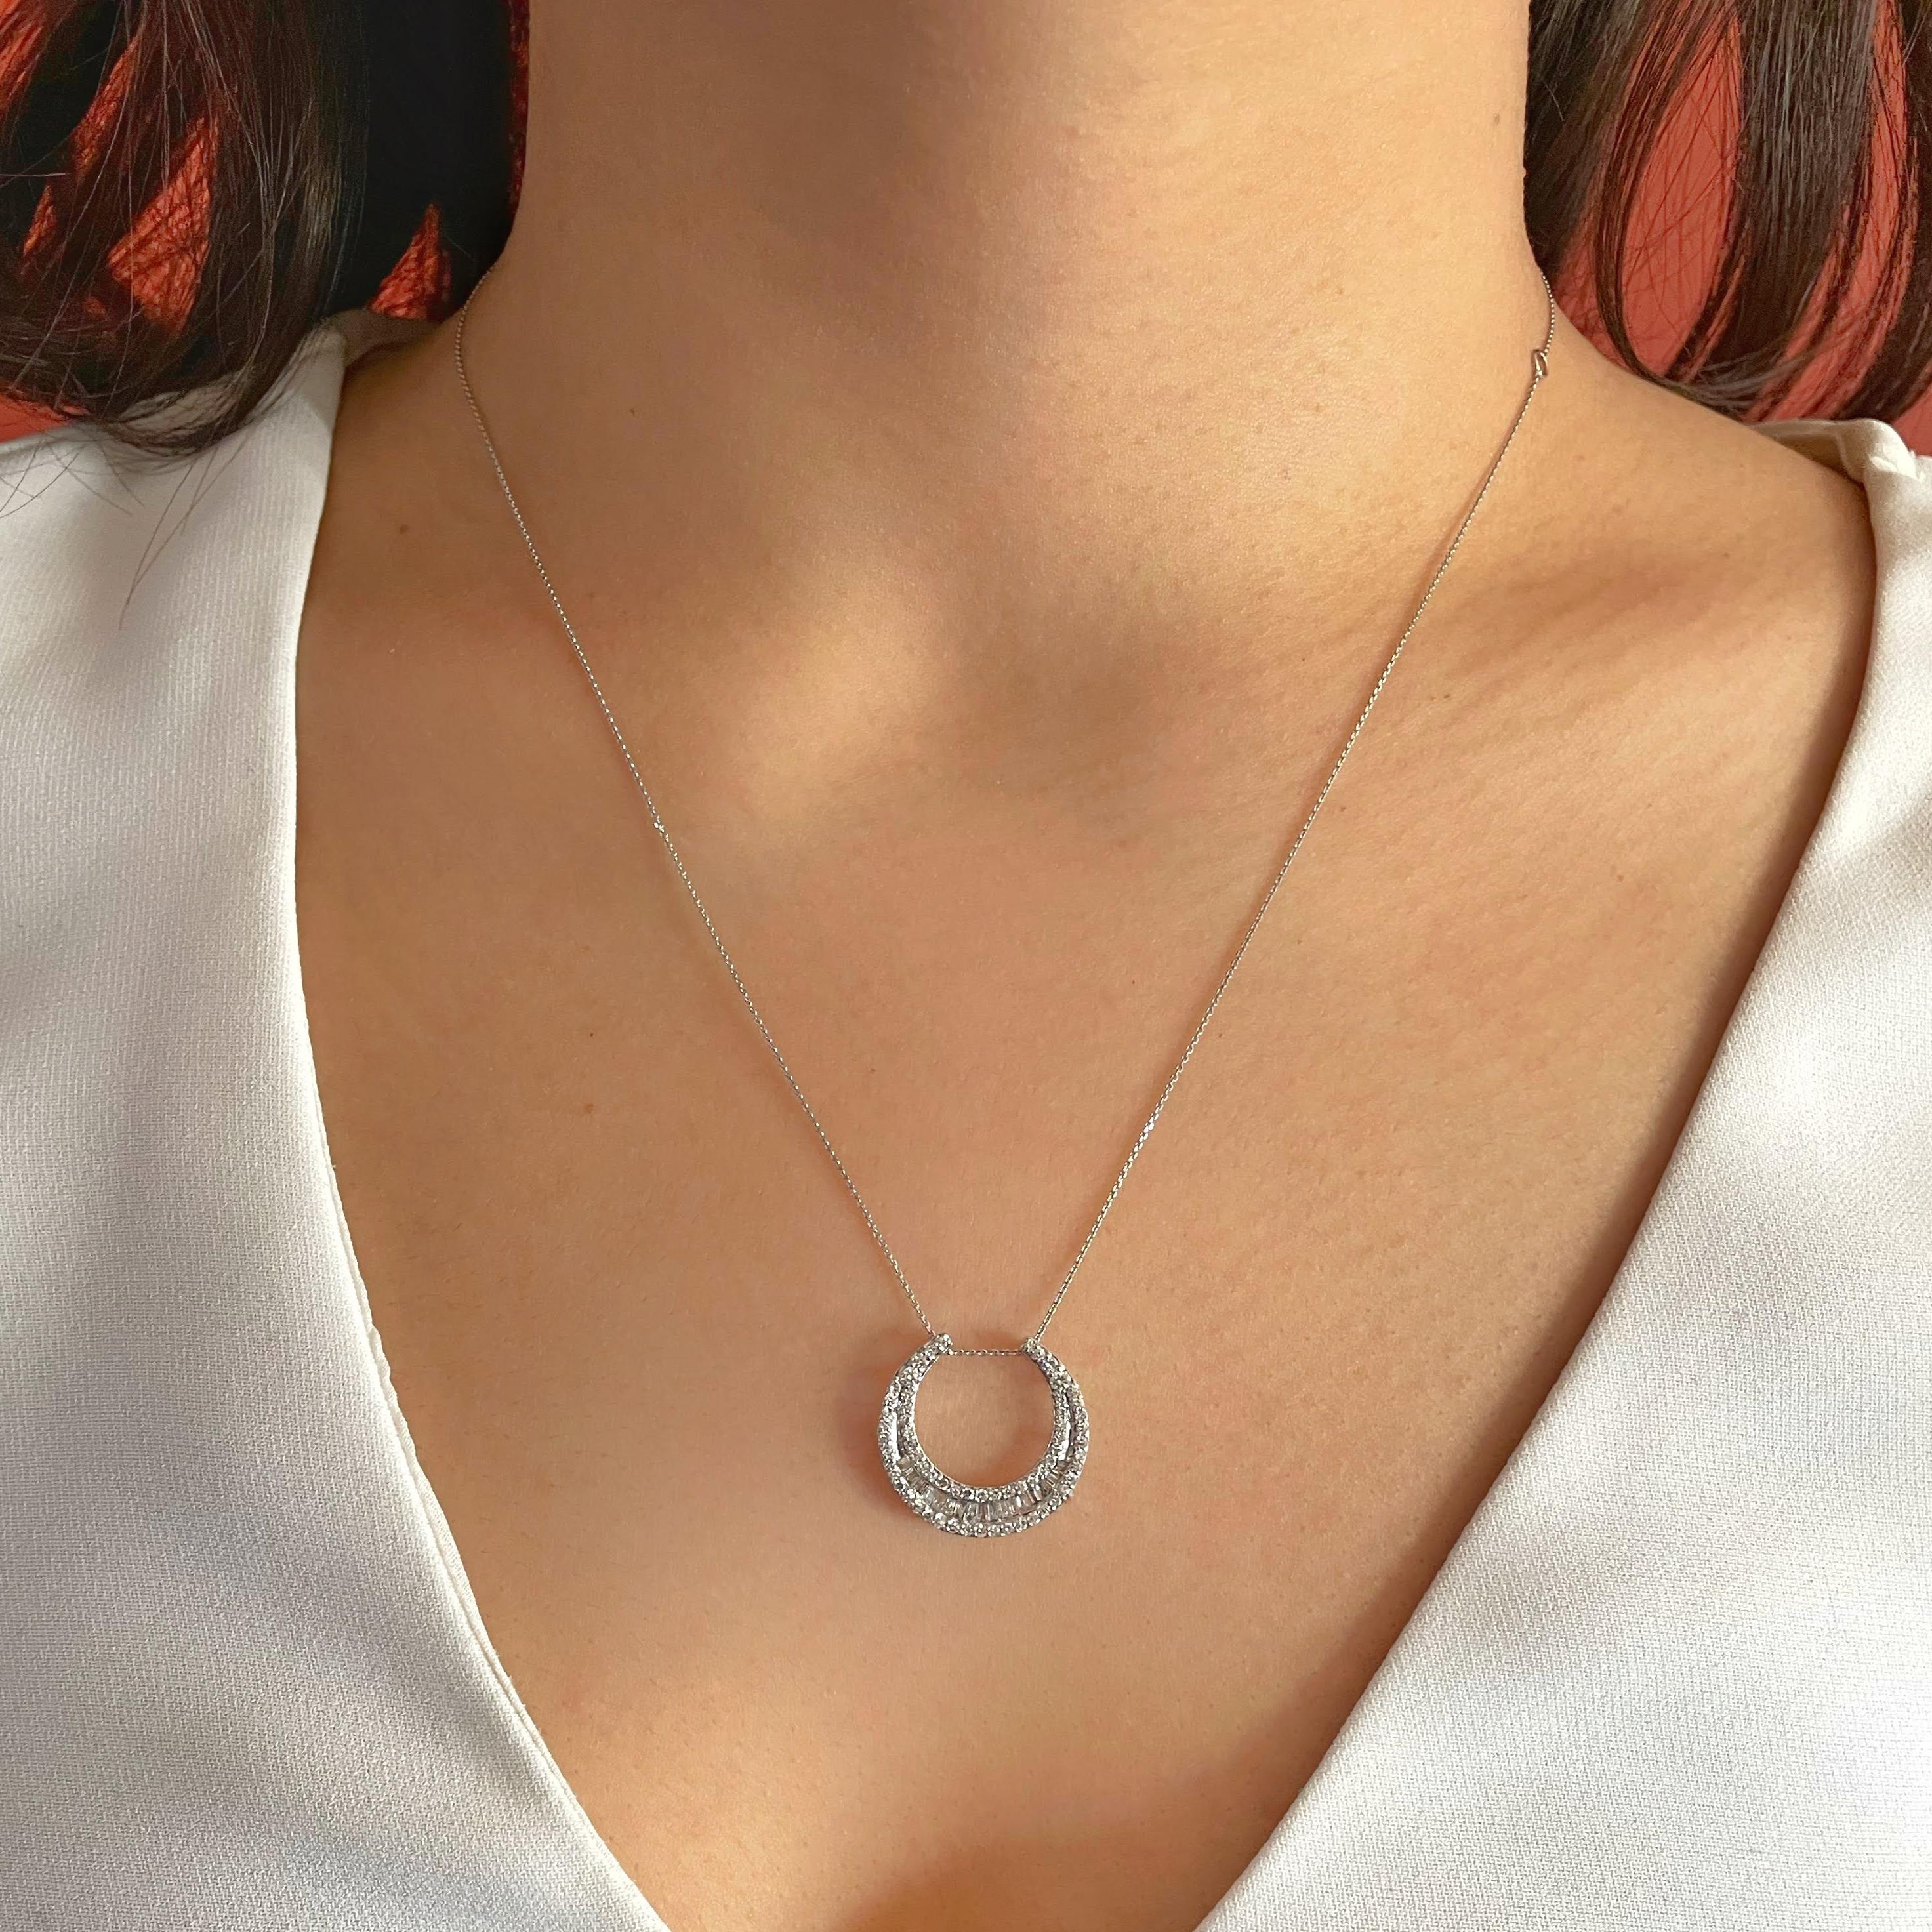 Discover the stylish design of our diamond fashion jewelry featuring this beautiful design of our Diamond Crescent Moon Necklace. This pendant comes with an adjustable chain so perfect as layering necklaces. Also available in 10K Yellow Gold.

10K